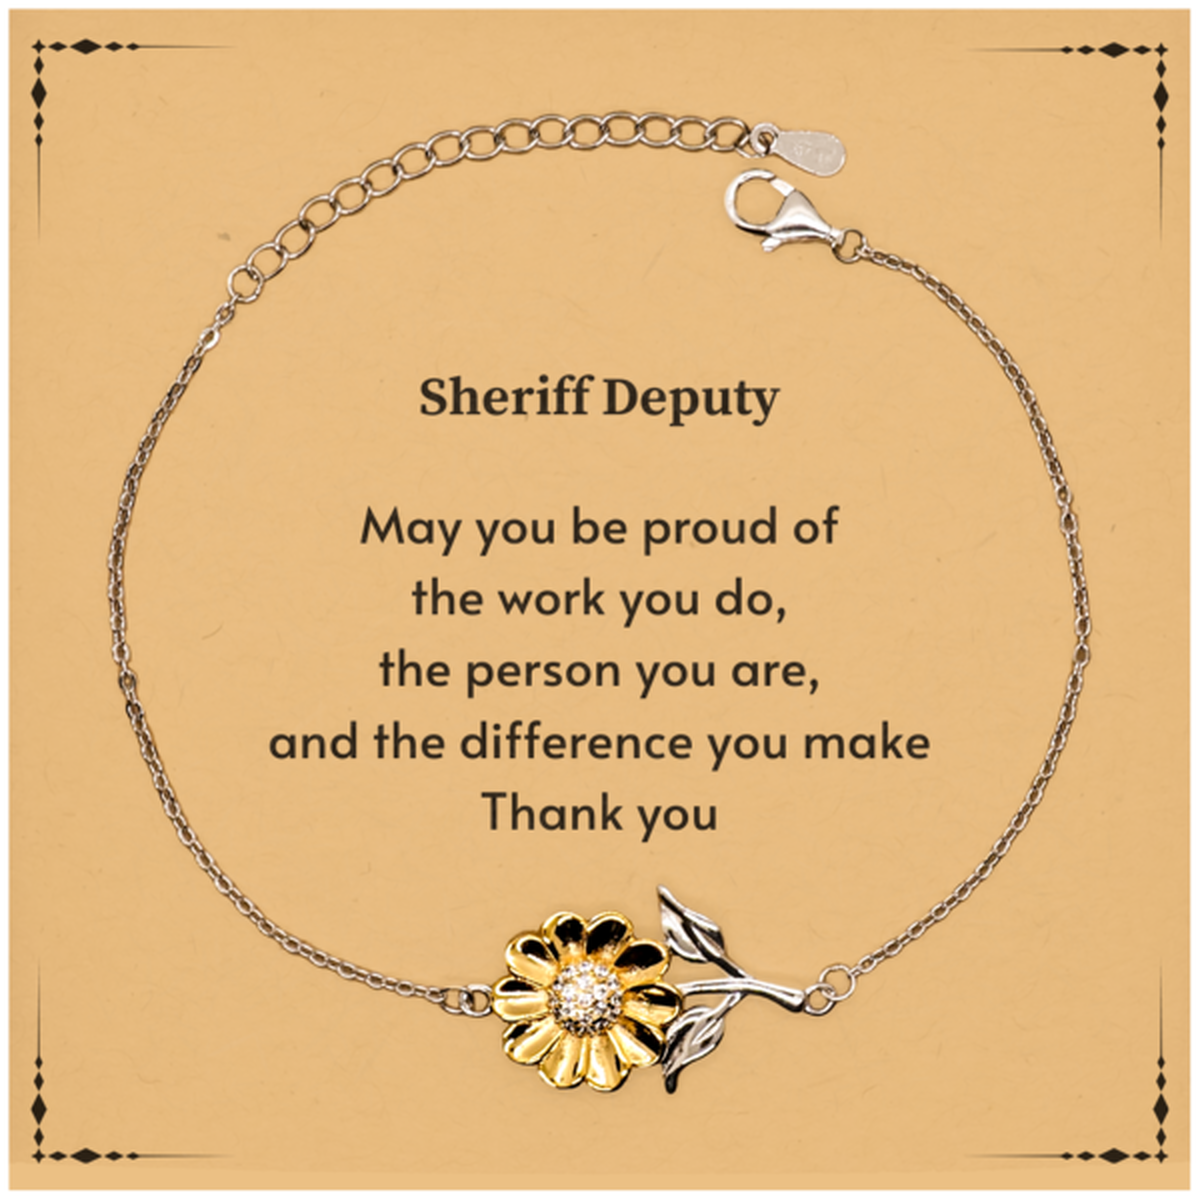 Heartwarming Sunflower Bracelet Retirement Coworkers Gifts for Sheriff Deputy, Sheriff Deputy May You be proud of the work you do, the person you are Gifts for Boss Men Women Friends